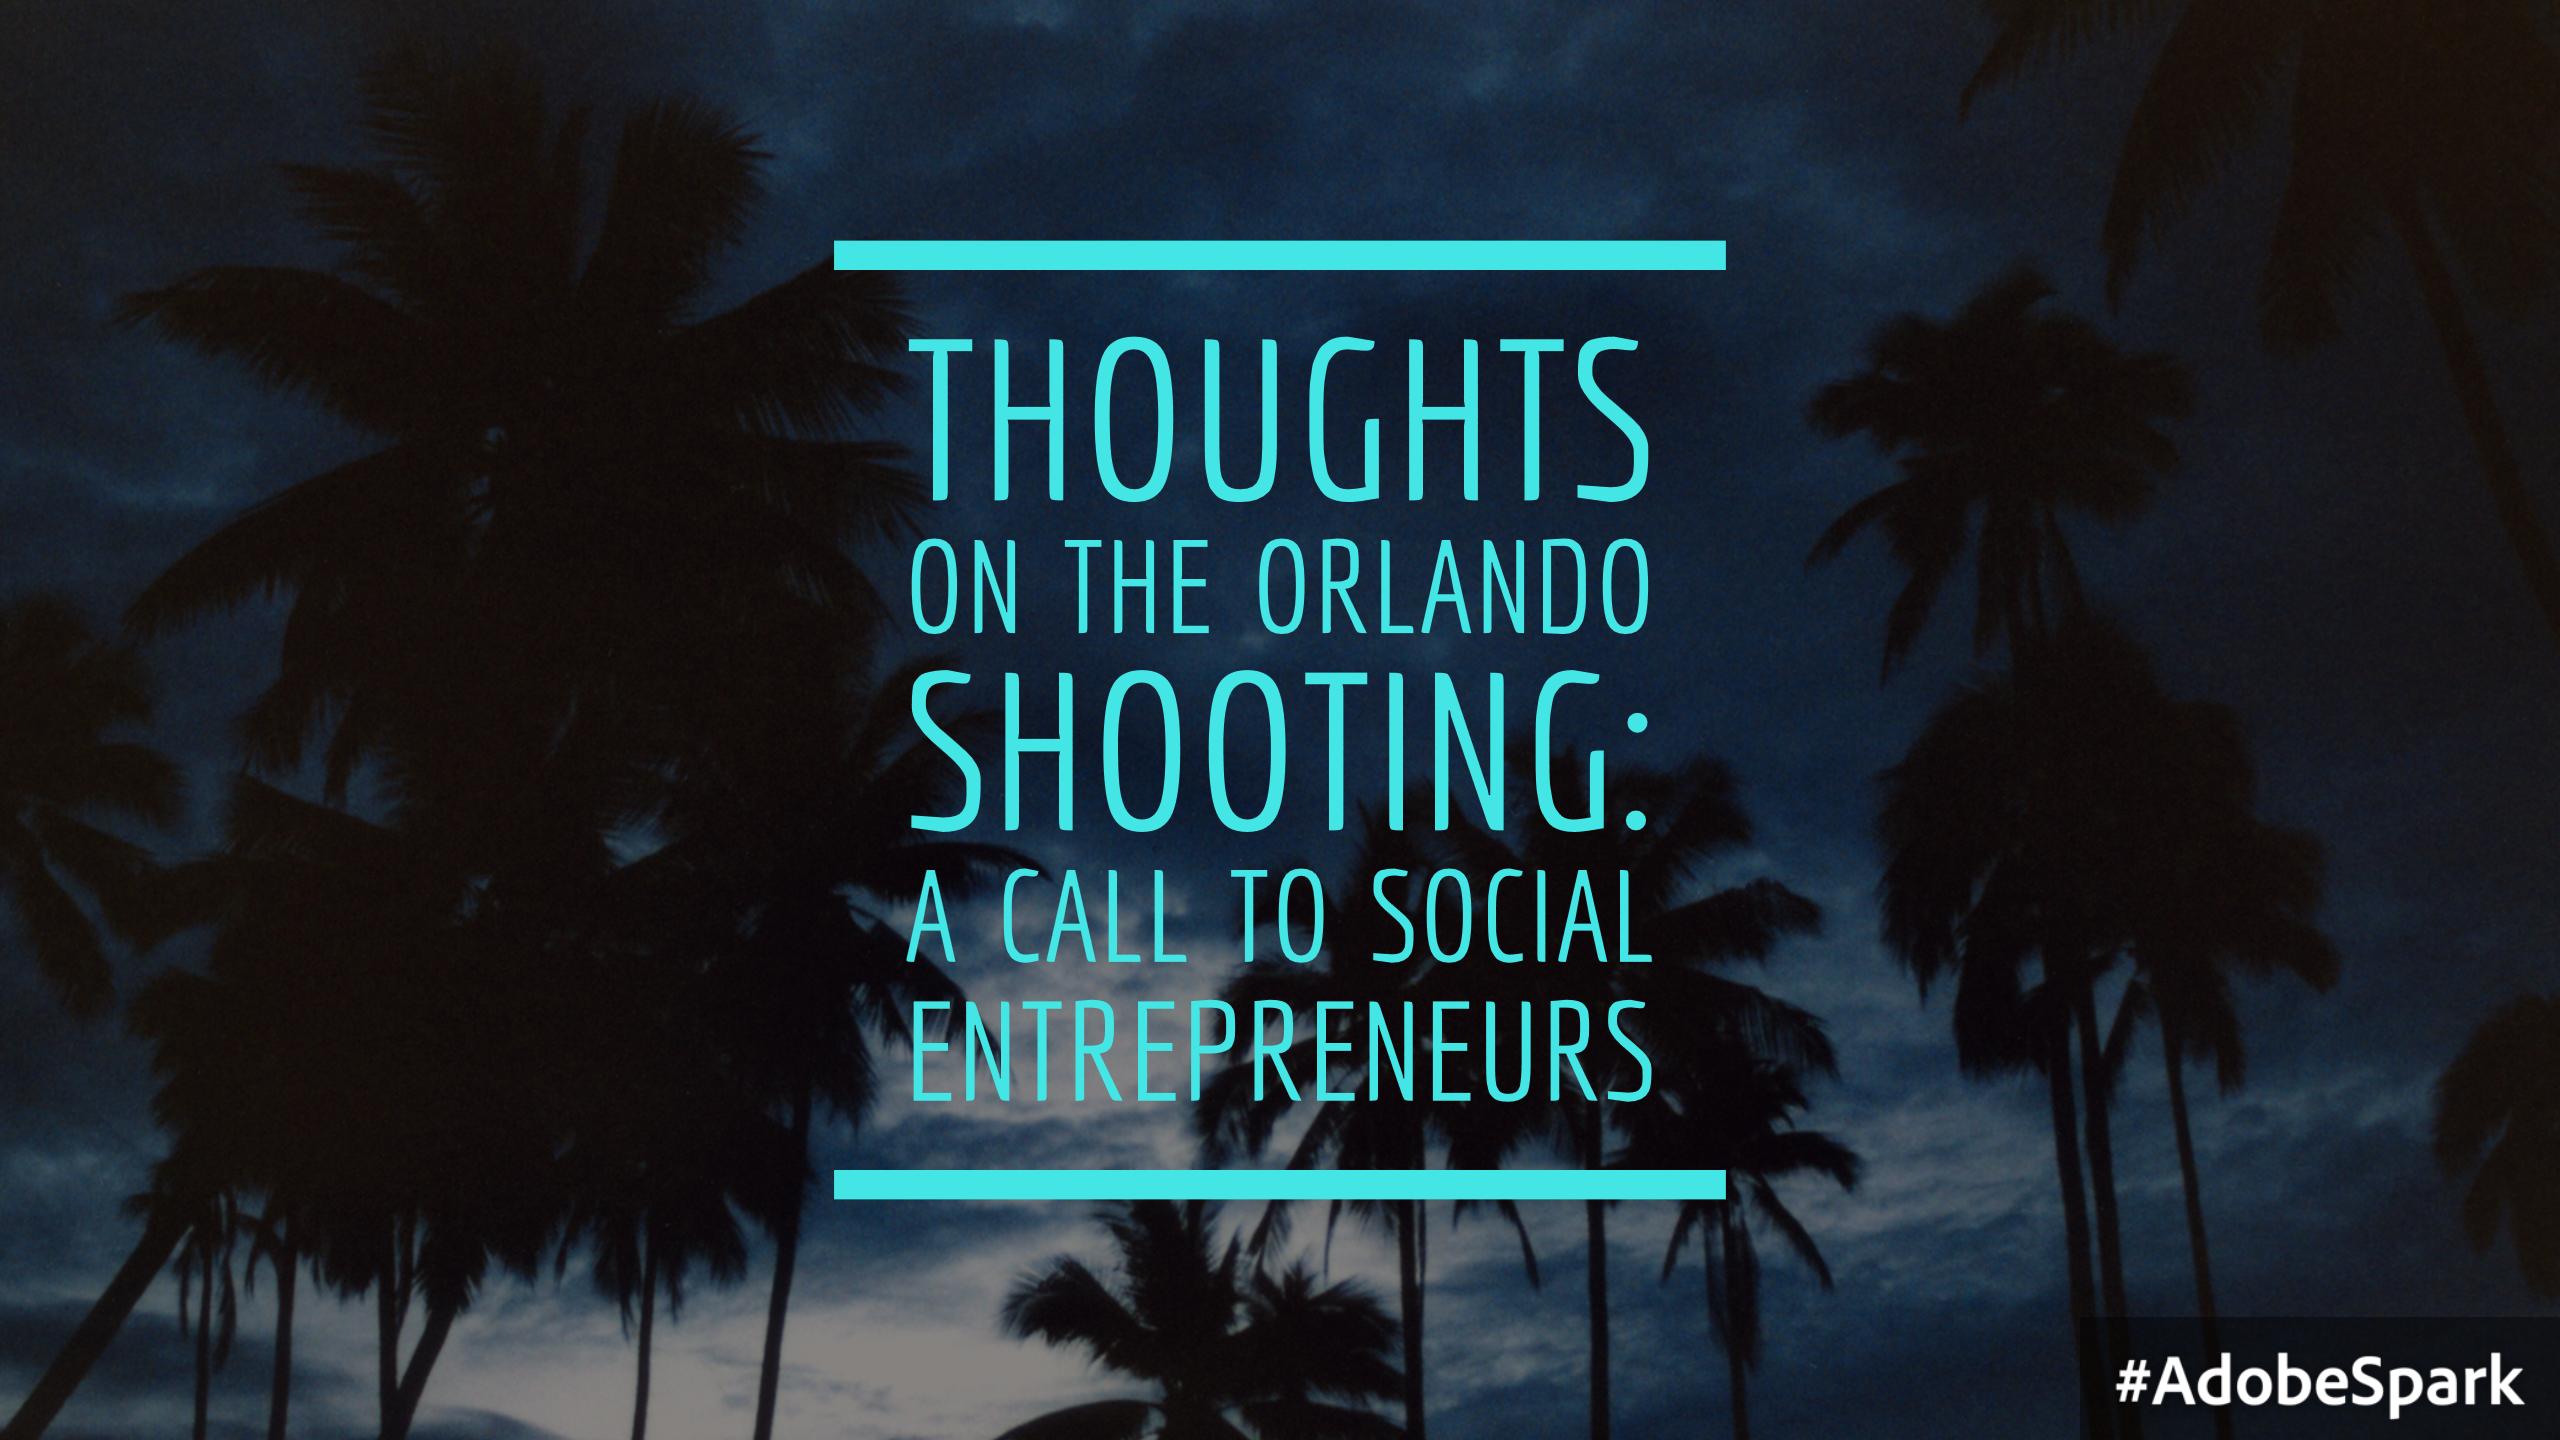 silhouette of palm trees with text overlay "Thoughts on the Orlando Shooting: A Call to Social Entrepreneurs"